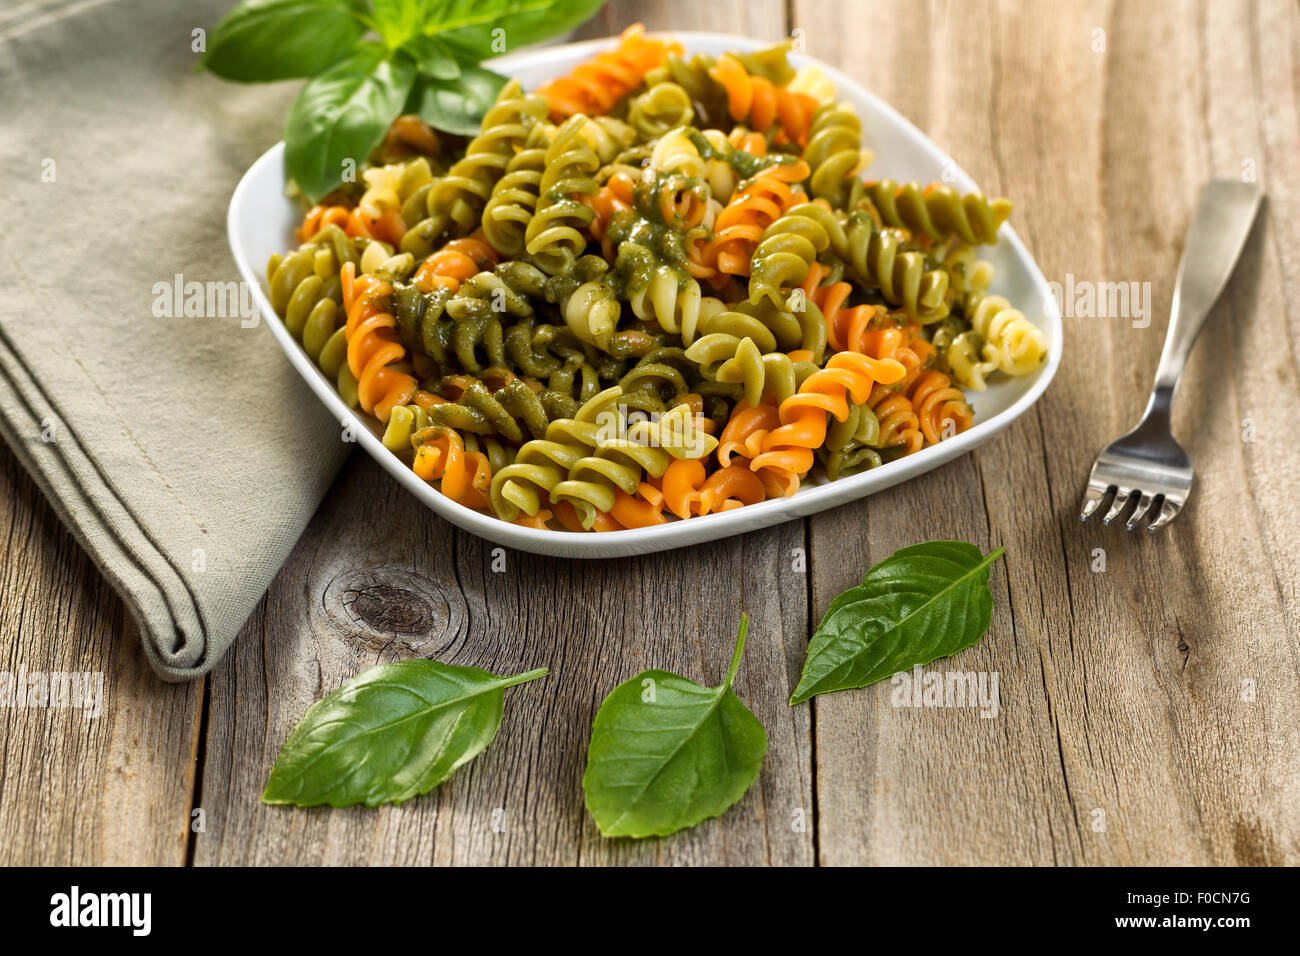 Fresh pasta with and fusilli noodles and basil pesto, selective focus on front part of dish. Stock Photo